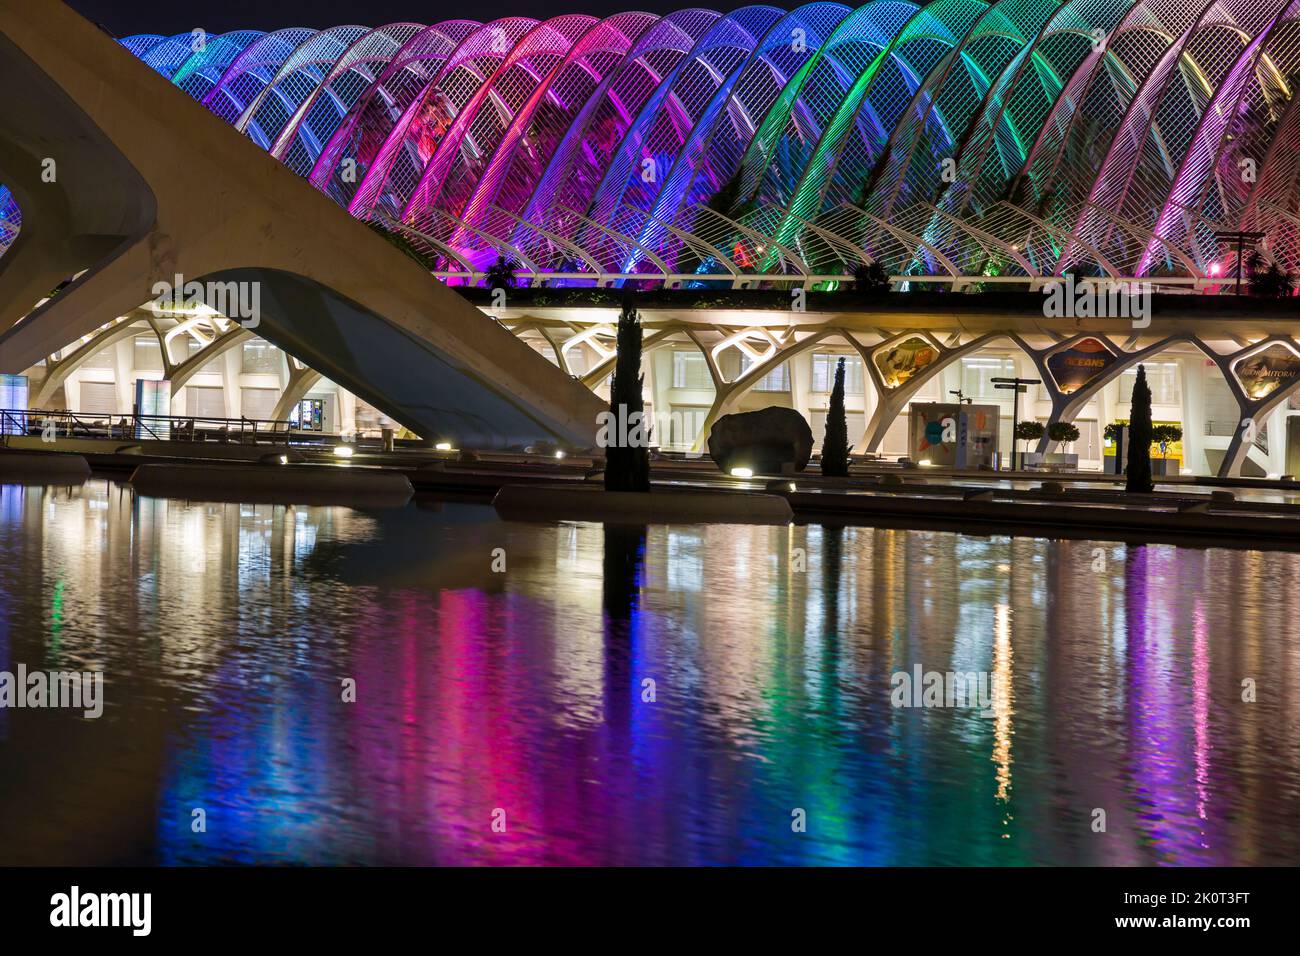 The canopy of the Umbracle gardens illuminated in different colours reflected in water at City of Arts and Sciences in Valencia, Spain in September Stock Photo